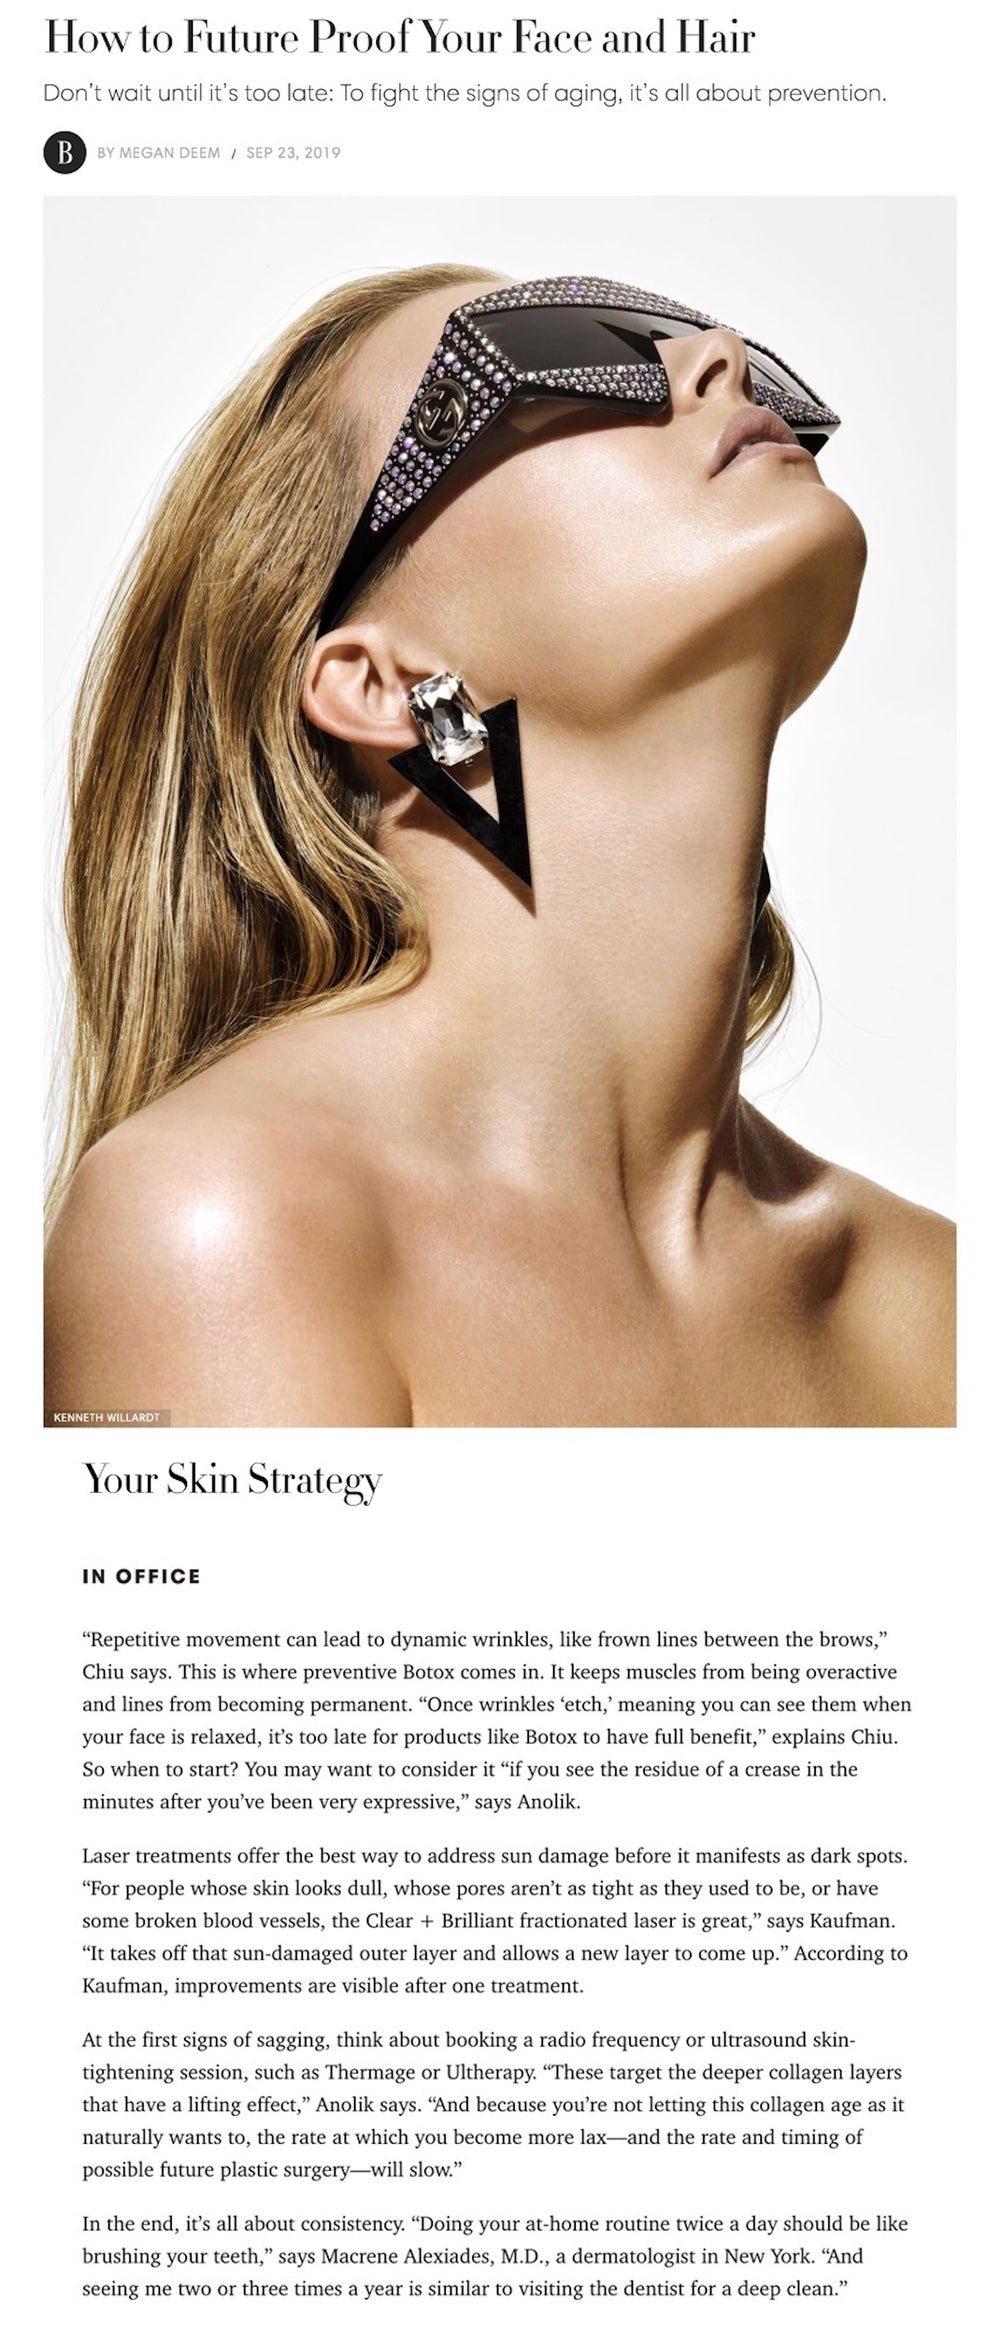 Harper’s Bazaar: How to Future Proof Your Face and Hair